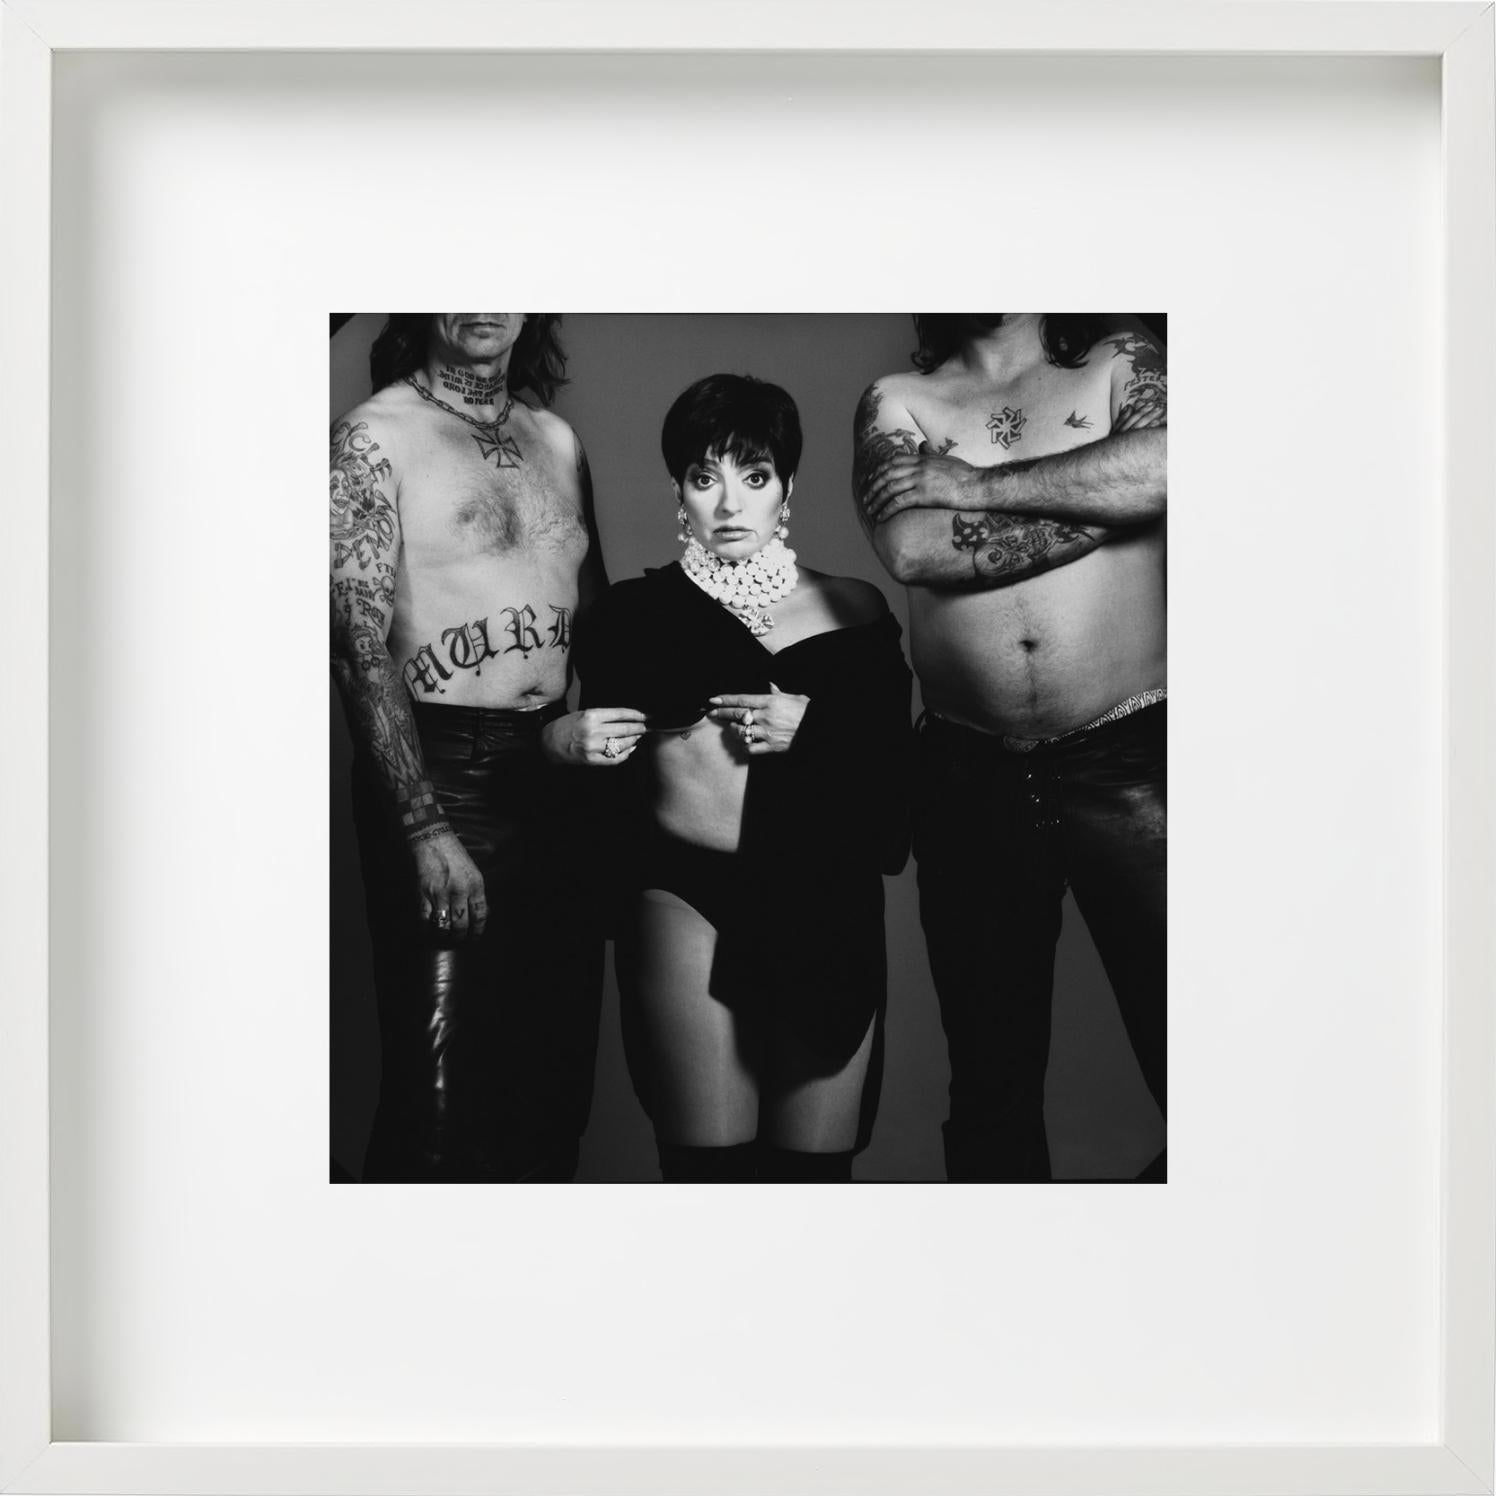 'Liza Minnelli' - in pearls posing with two men, fine art photography, 1996 - Contemporary Photograph by Timothy White